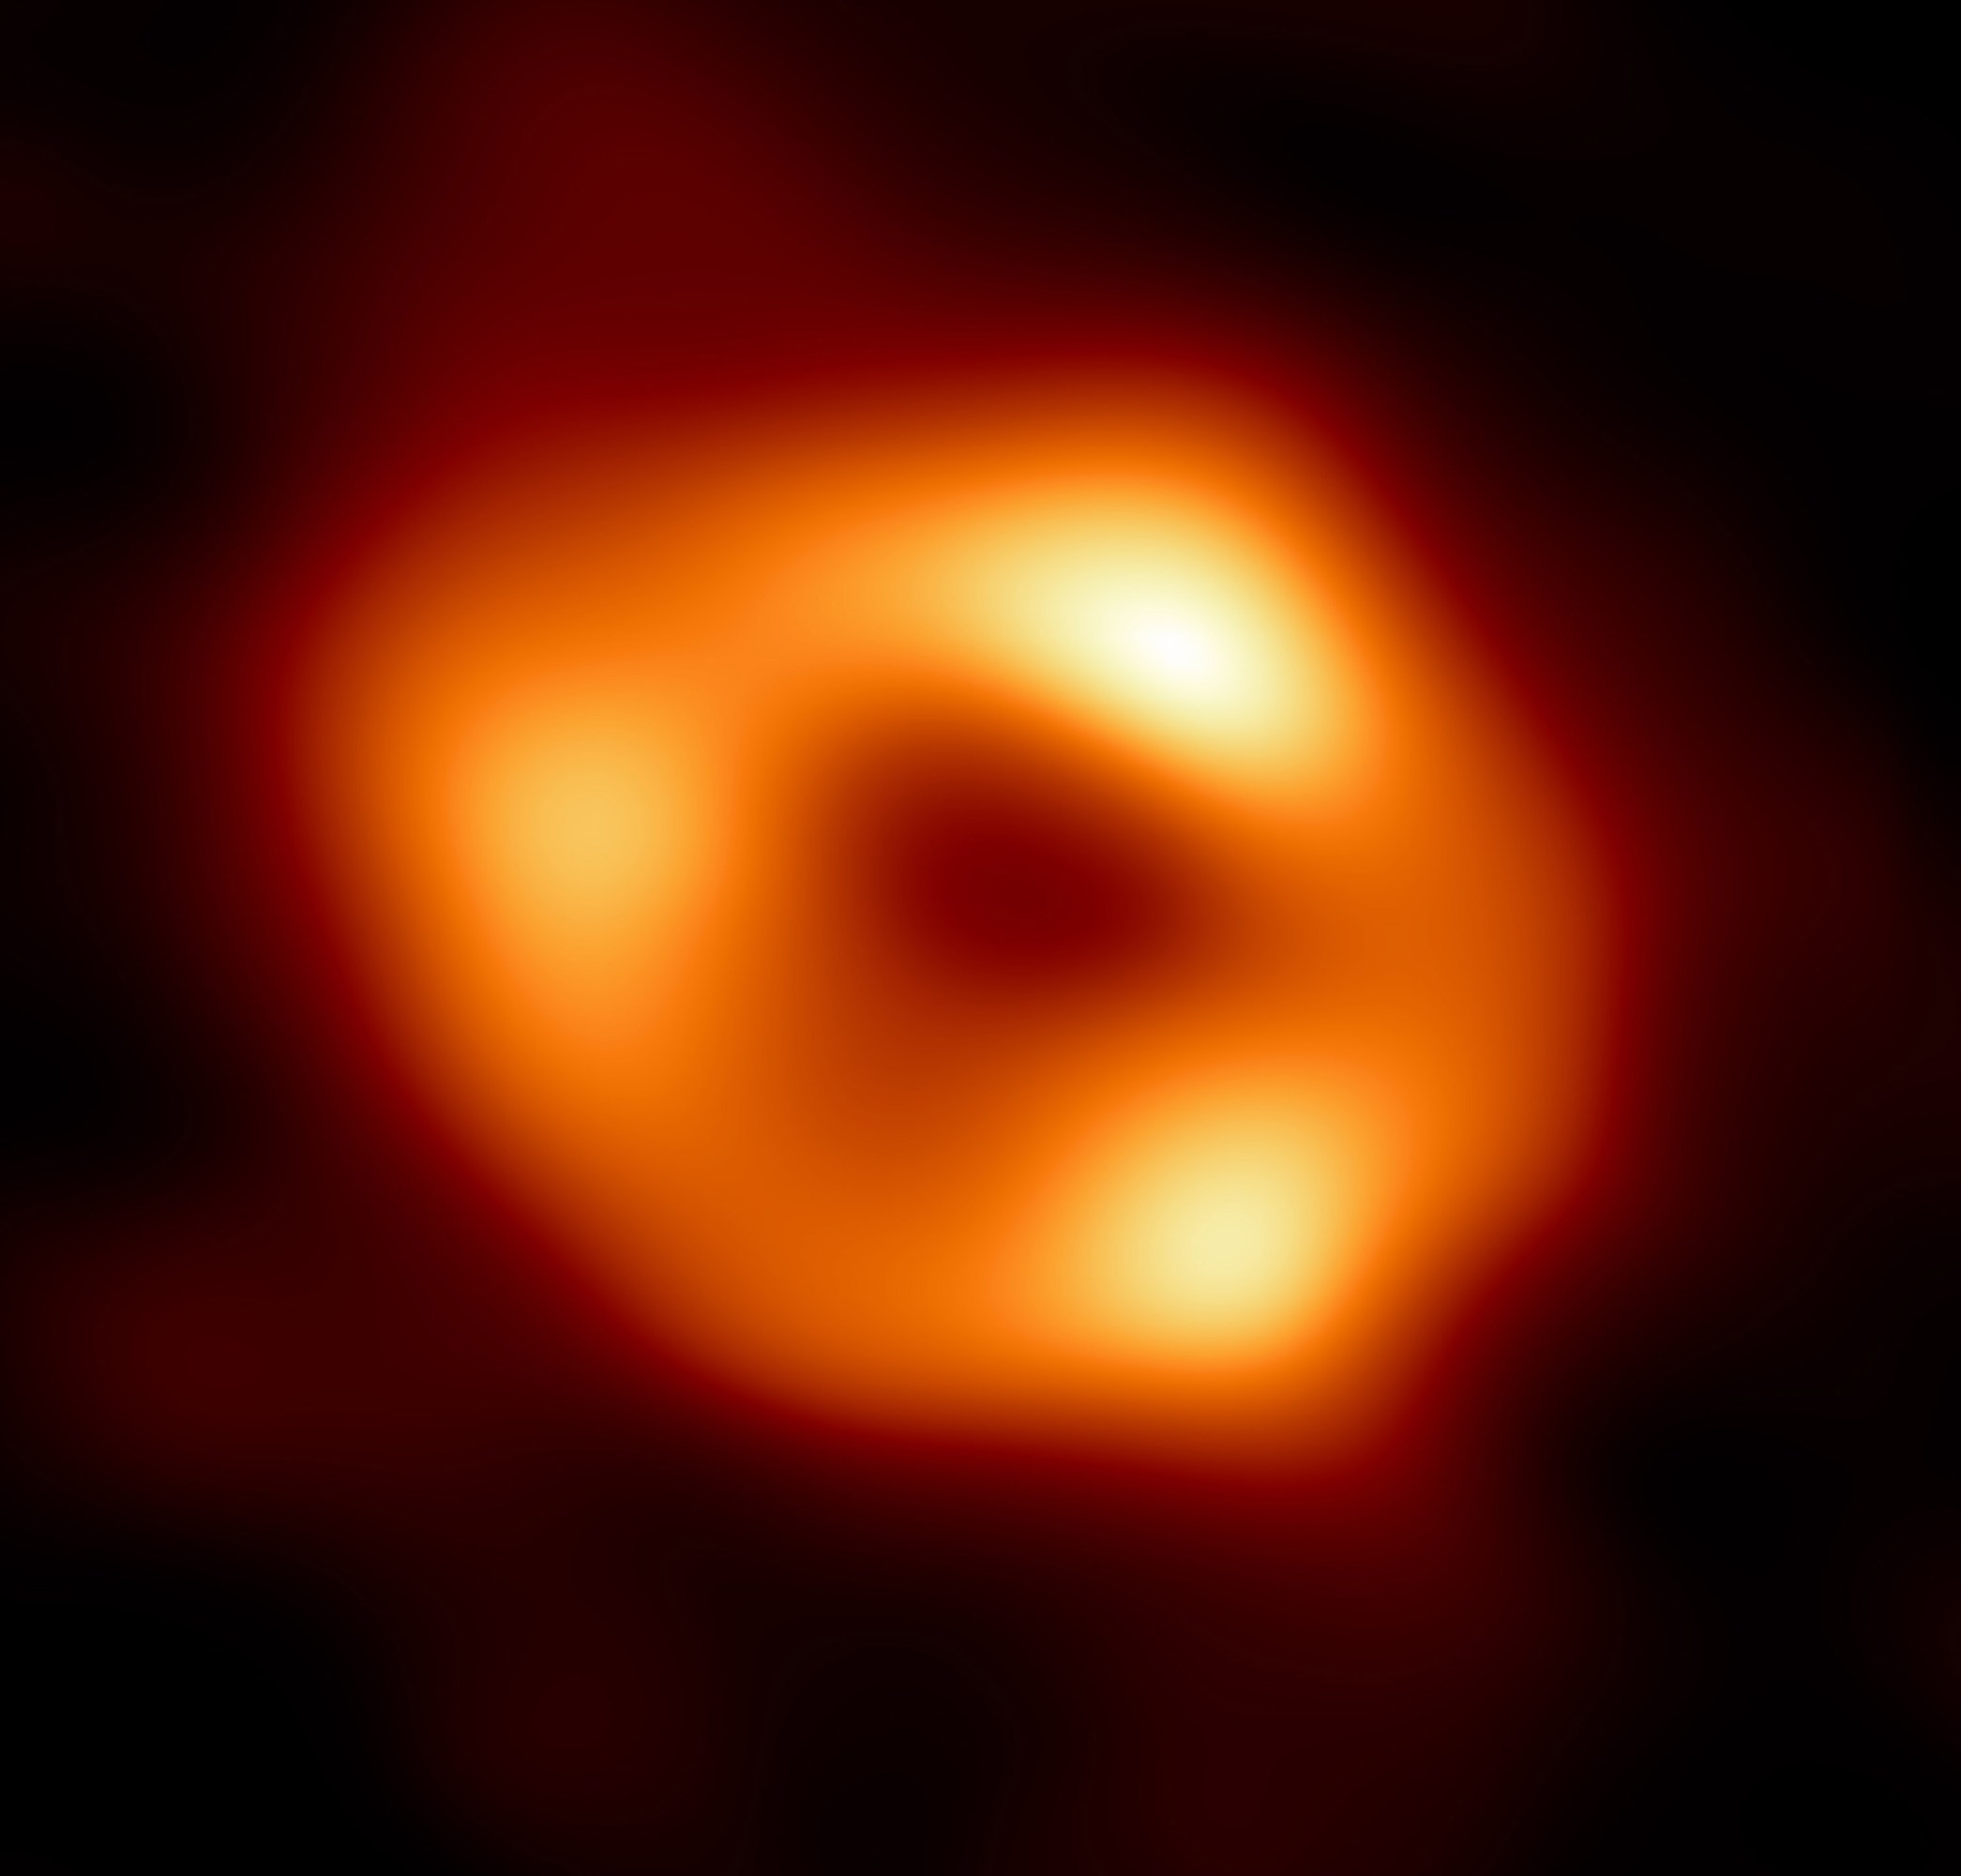 Supermassive black hole at the center of the Milky Way